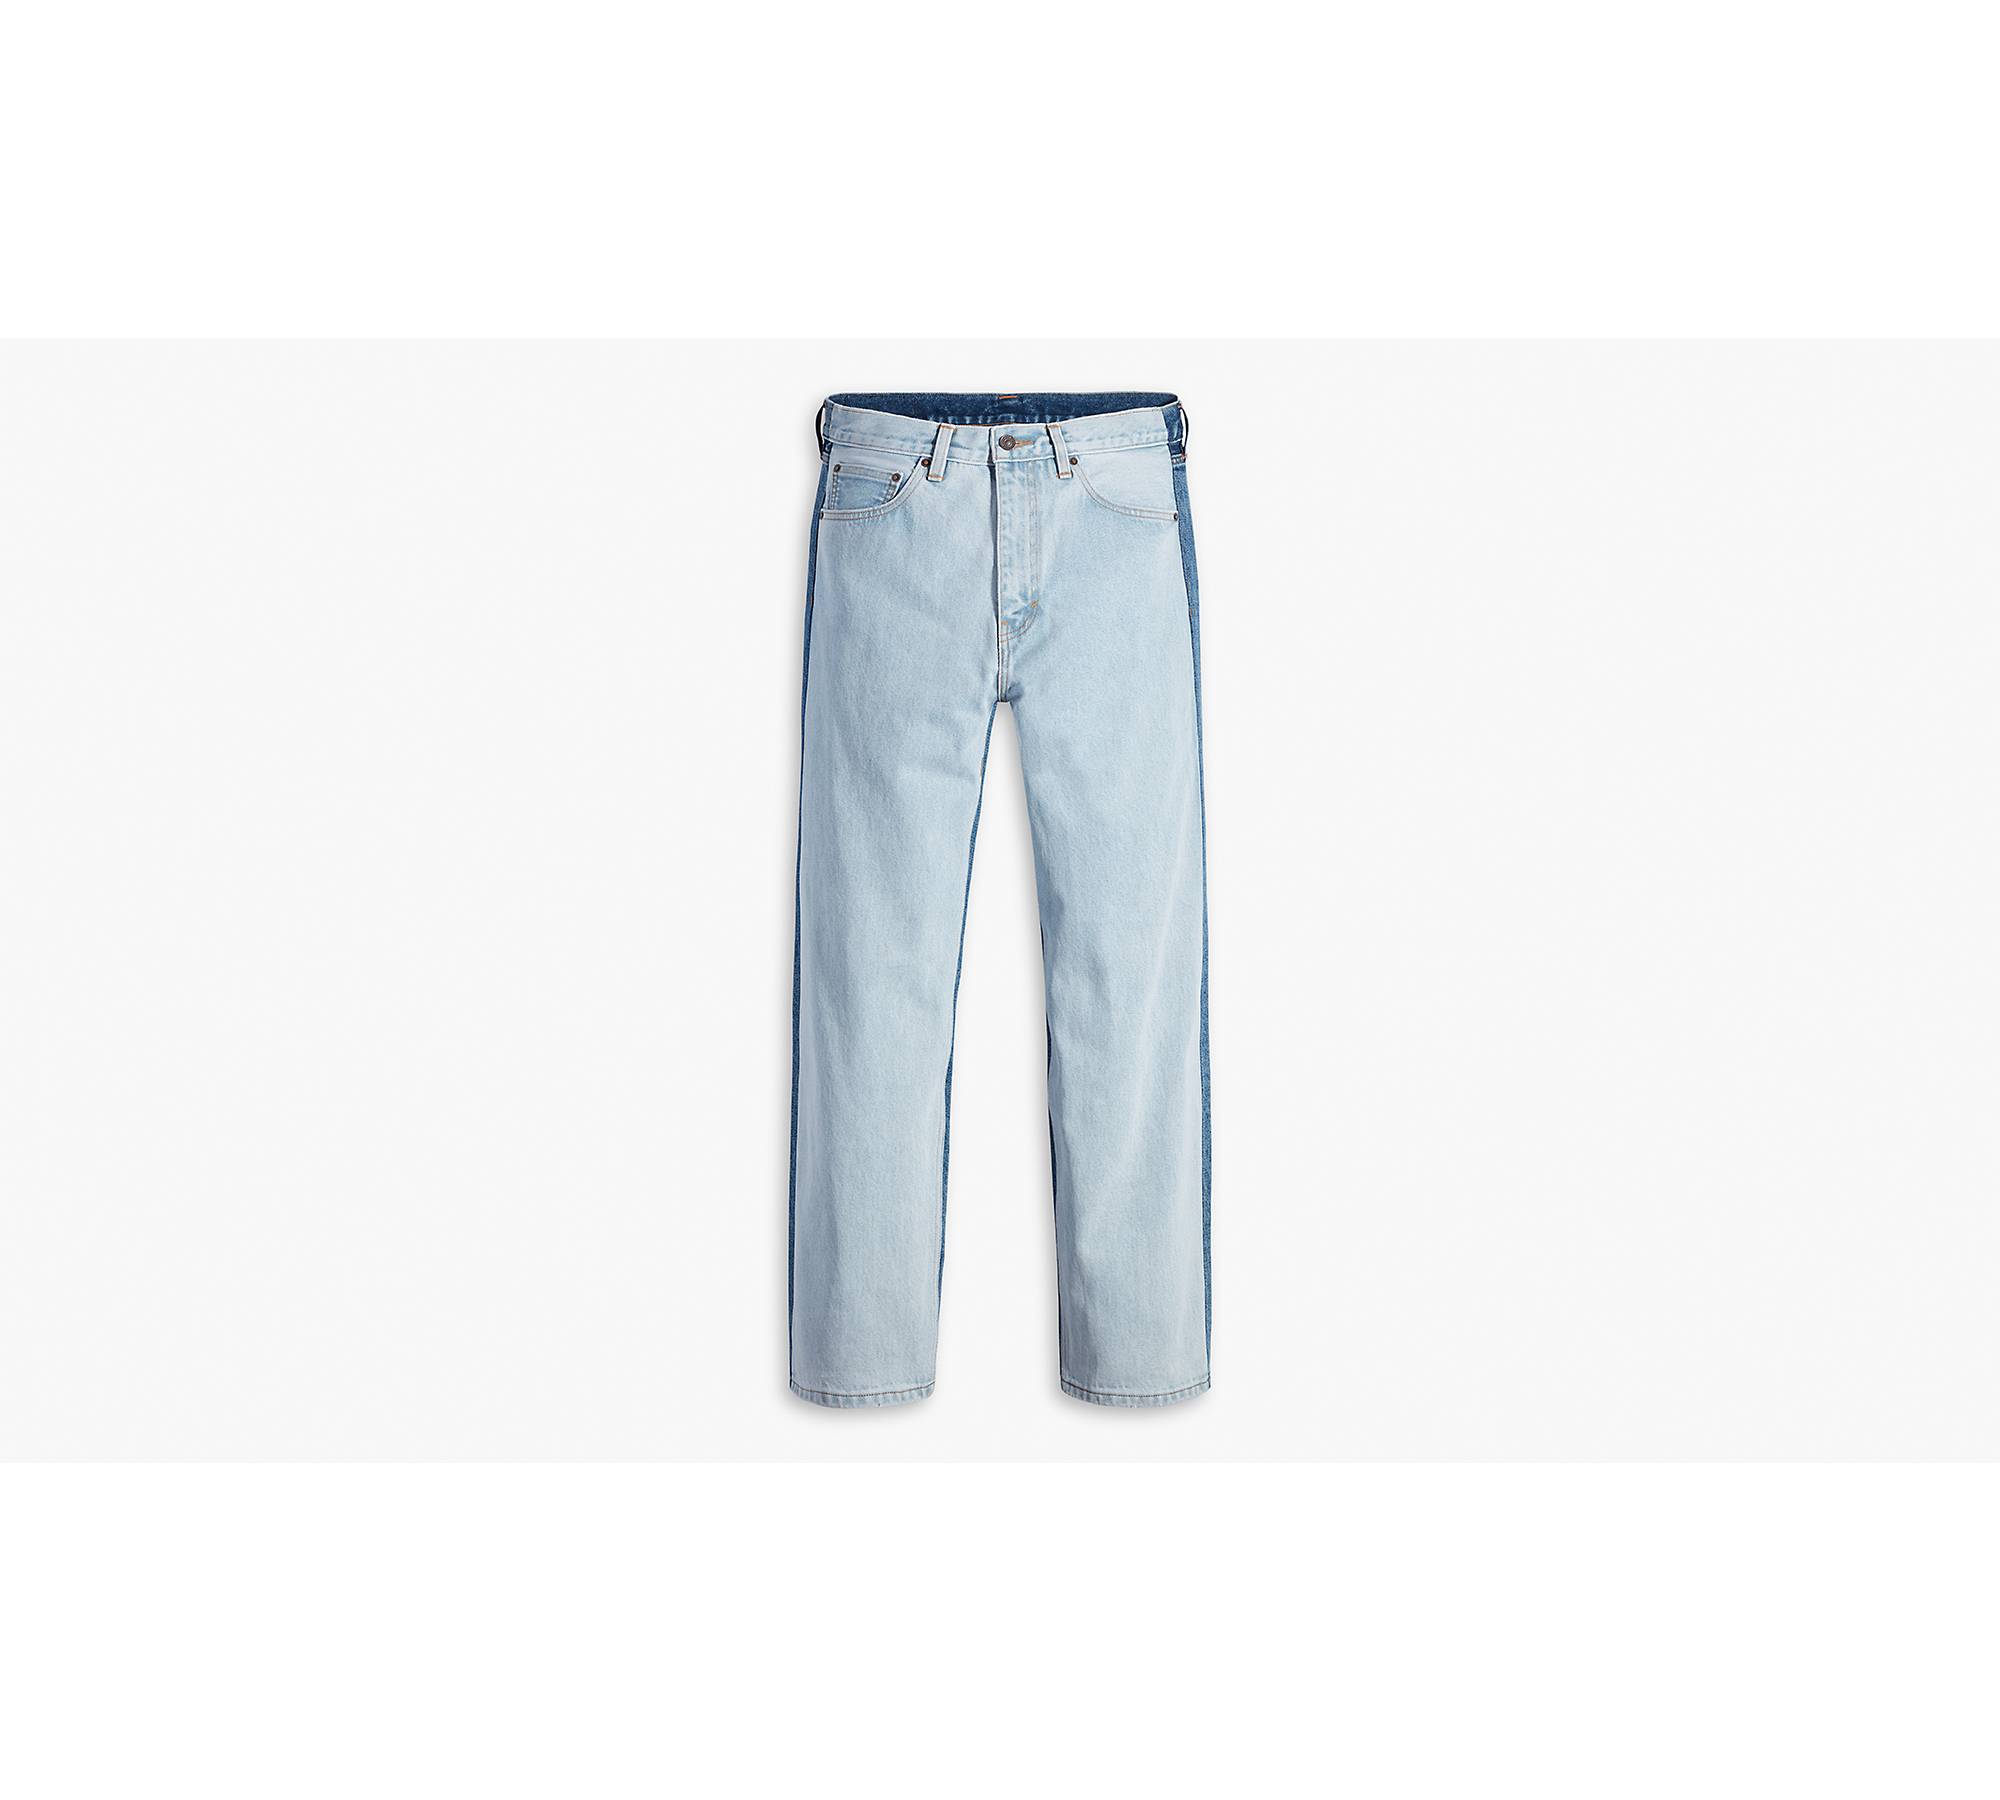 Levi's Two-Tone Skate Baggy Jeans